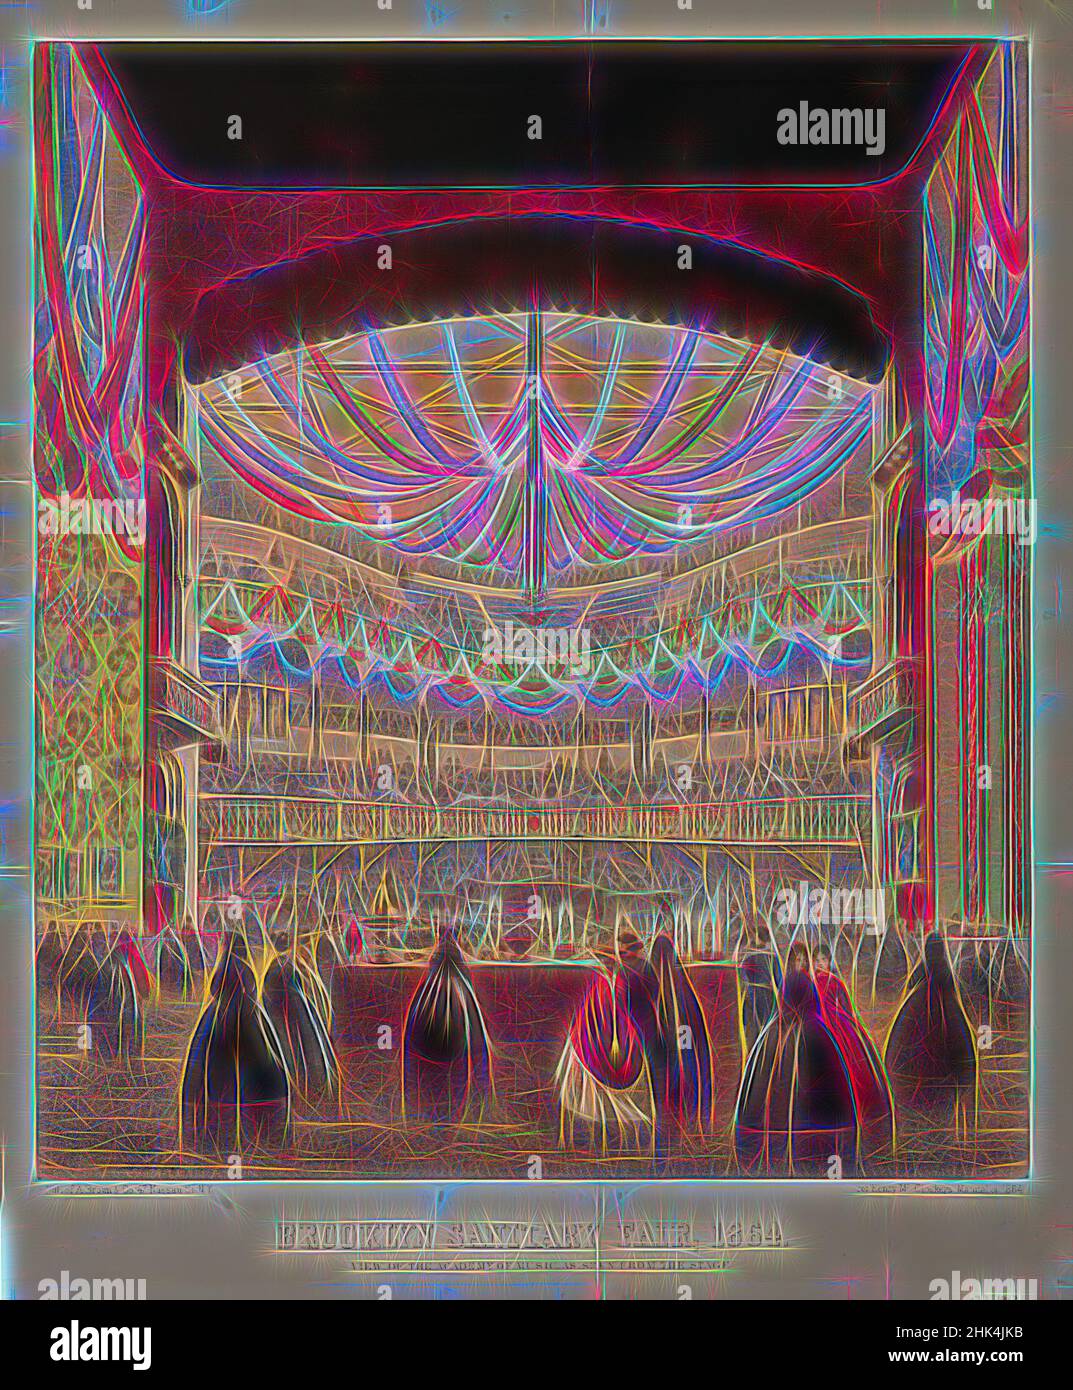 Inspired by Brooklyn Sanitary Fair, Lithograph on wove paper, 1864, image: 16 1/8 x 14 in., 40.9 x 35.5 cm, Reimagined by Artotop. Classic art reinvented with a modern twist. Design of warm cheerful glowing of brightness and light ray radiance. Photography inspired by surrealism and futurism, embracing dynamic energy of modern technology, movement, speed and revolutionize culture Stock Photo